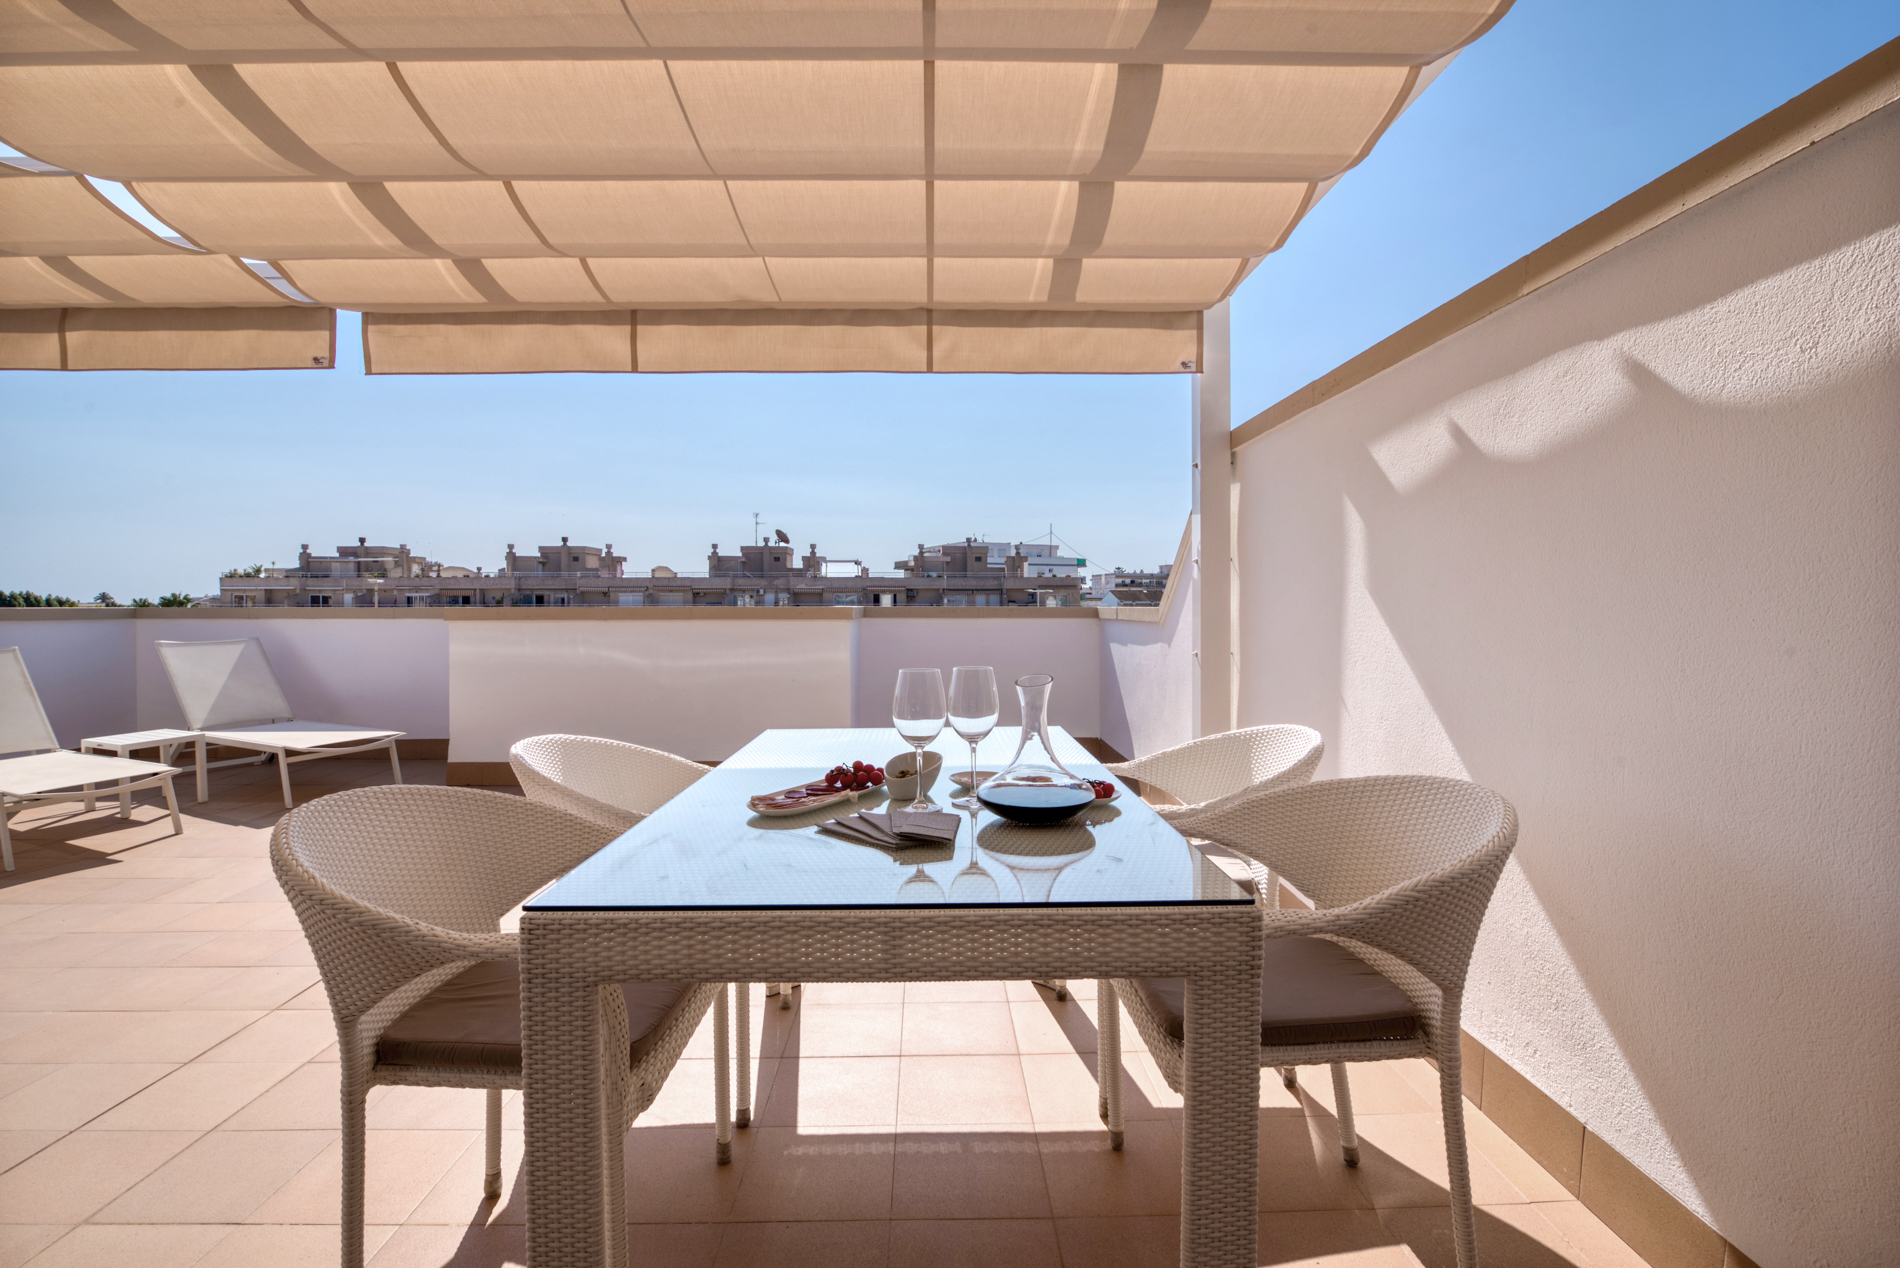 3 Bedroom Penthouse for Sale in Javea near Arenal Beach